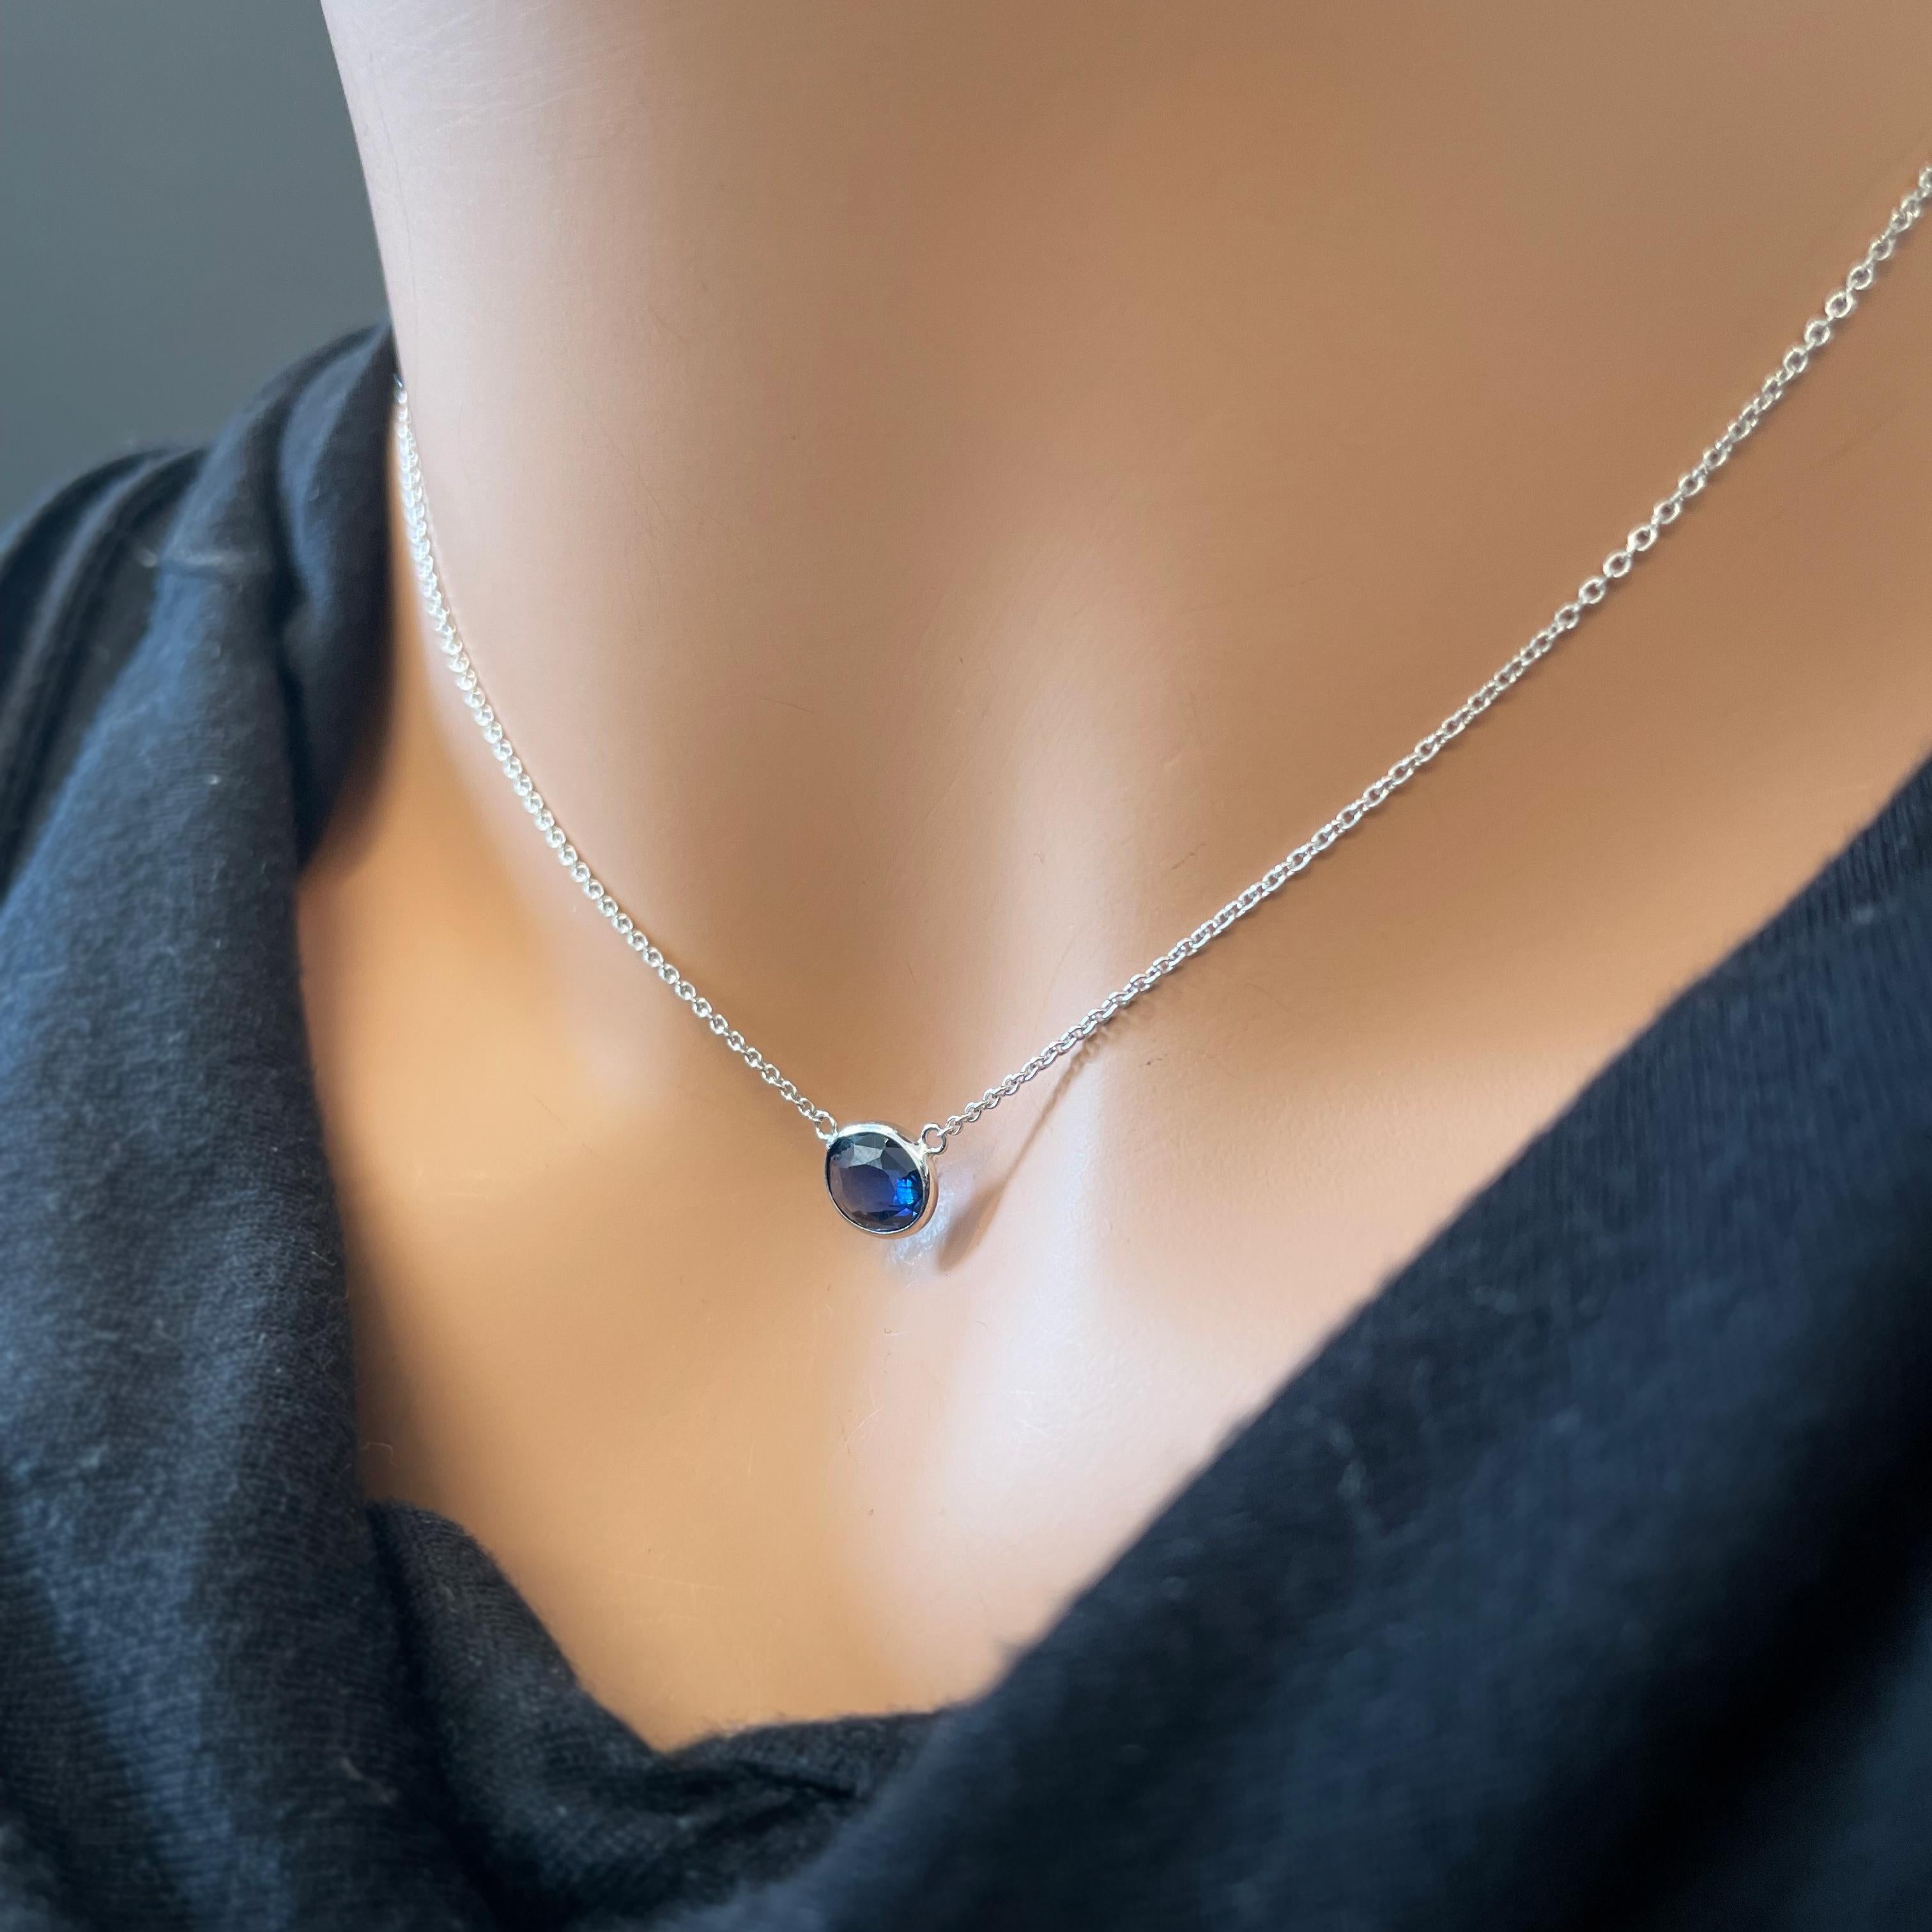 Contemporary 2.04 Carat Blue Oval Sapphire Fashion Necklaces In 14K White Gold  For Sale